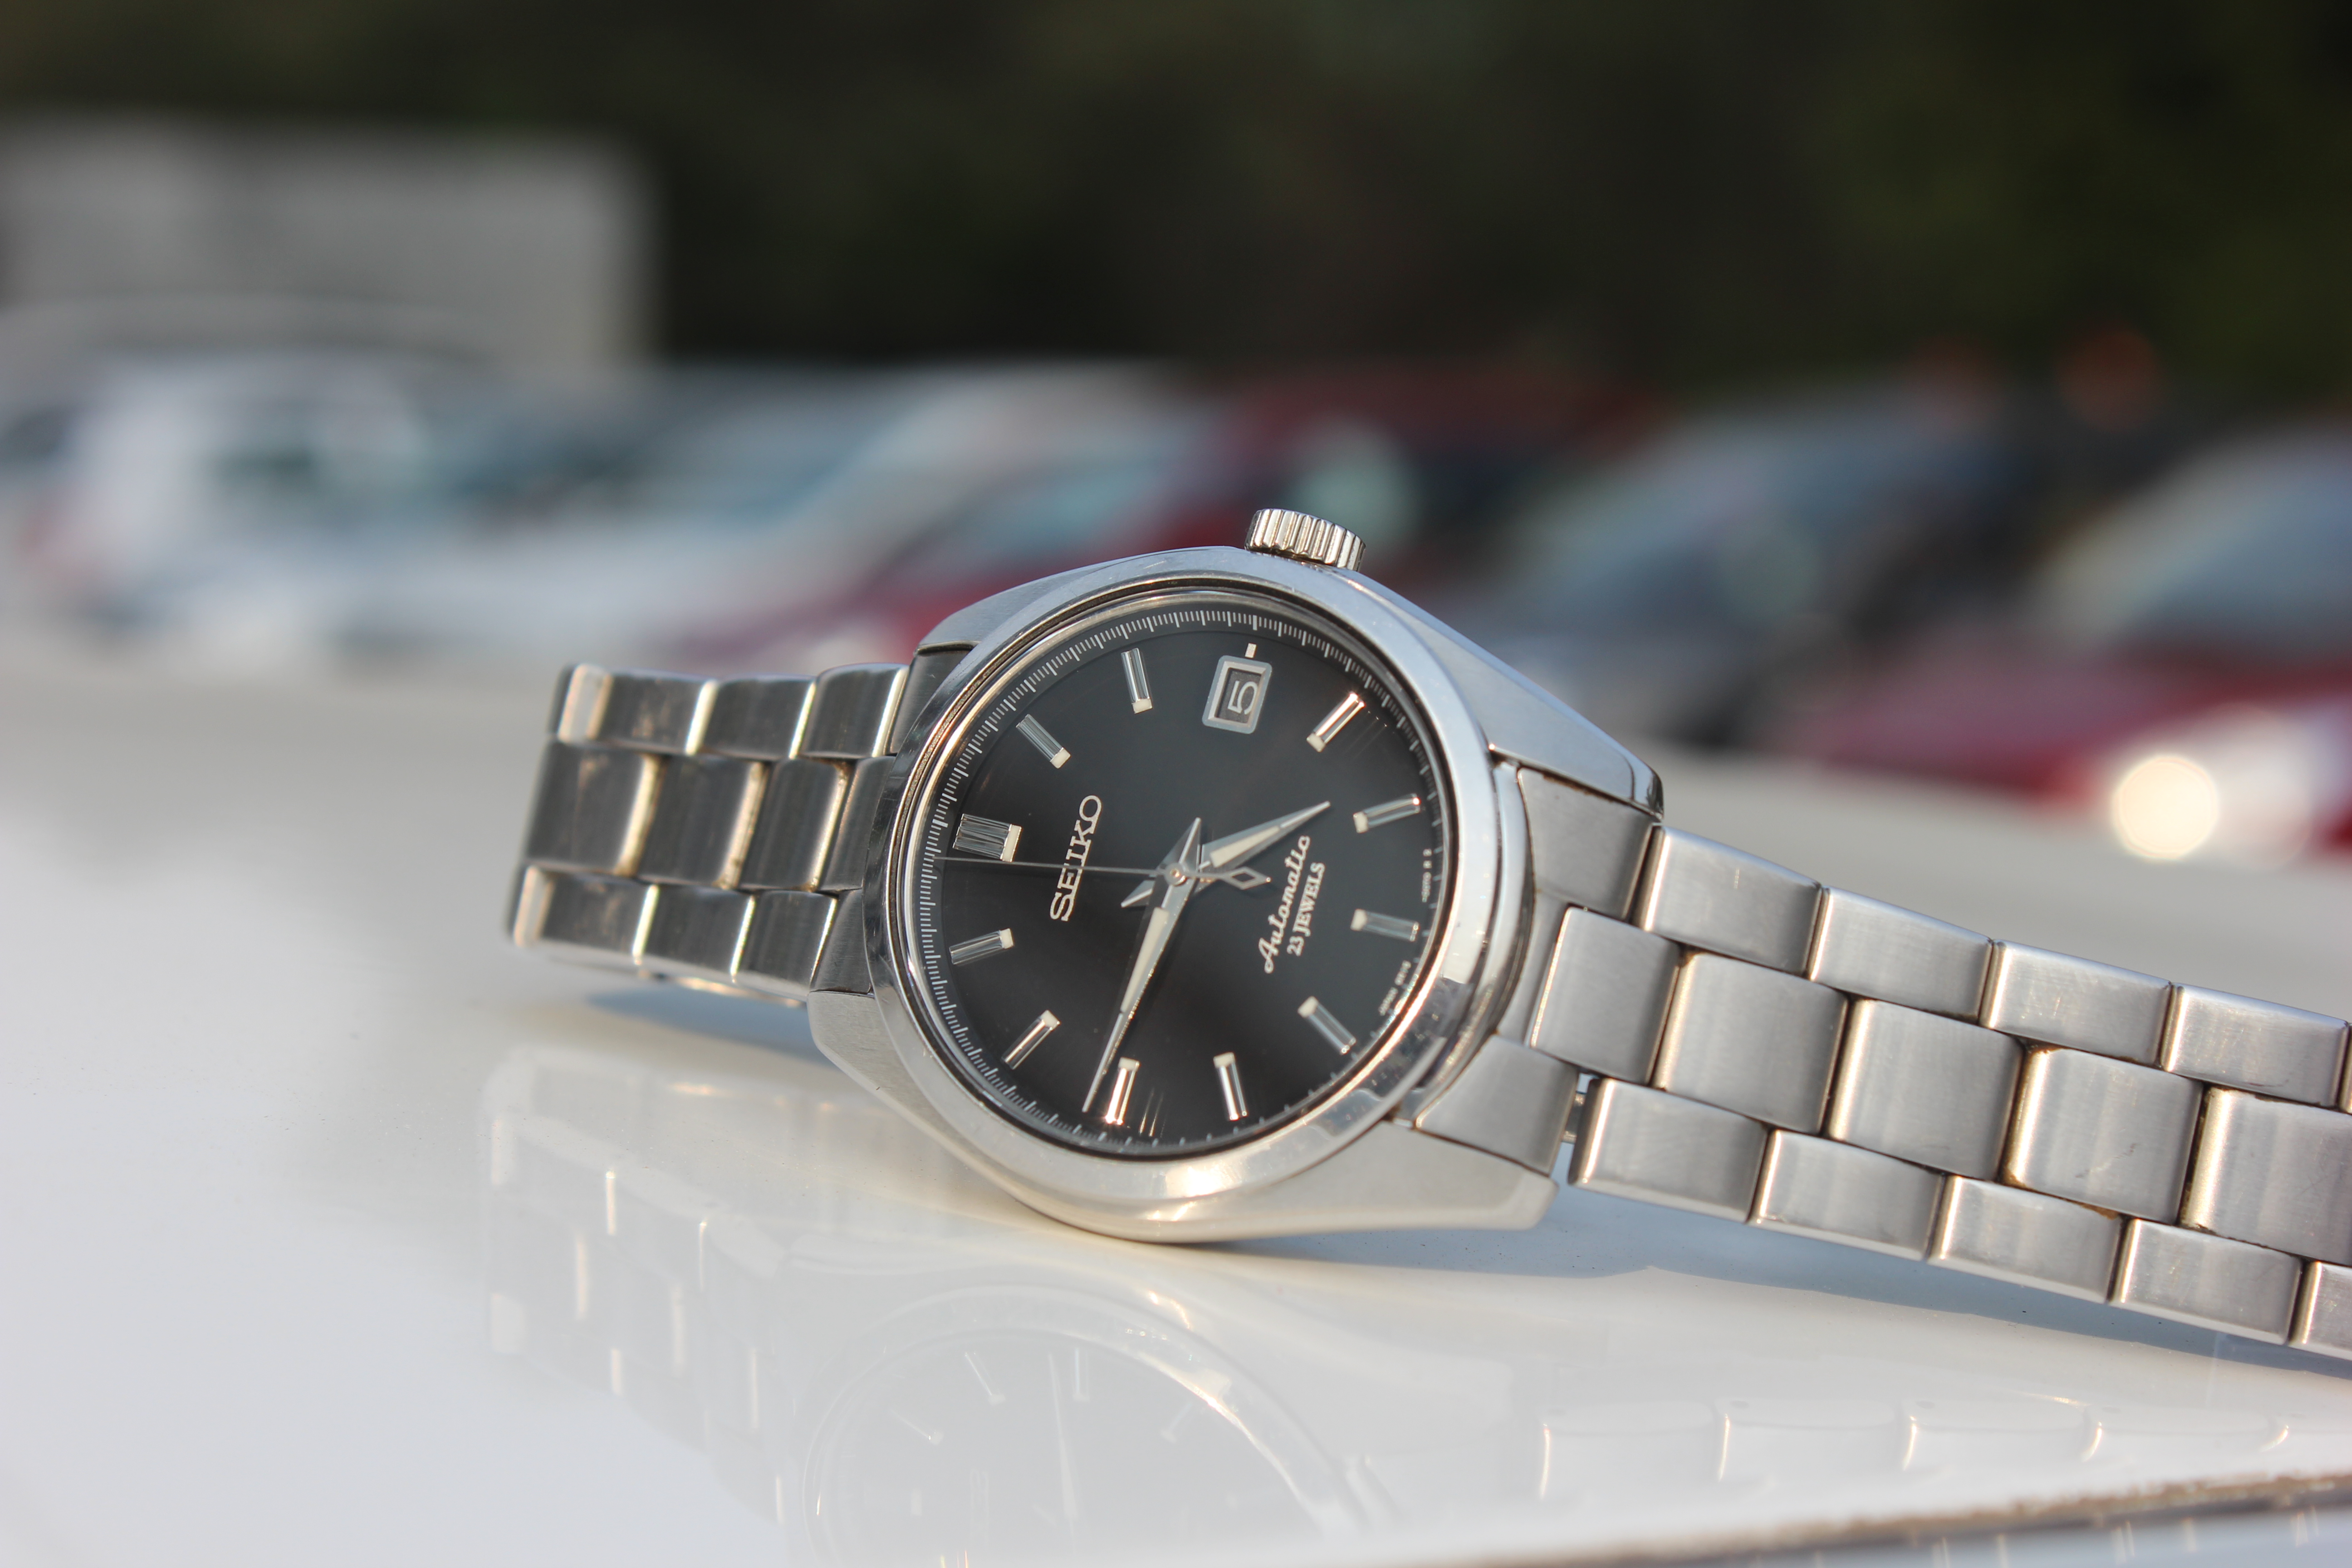 Seiko SARB033 Automatic Watch Review